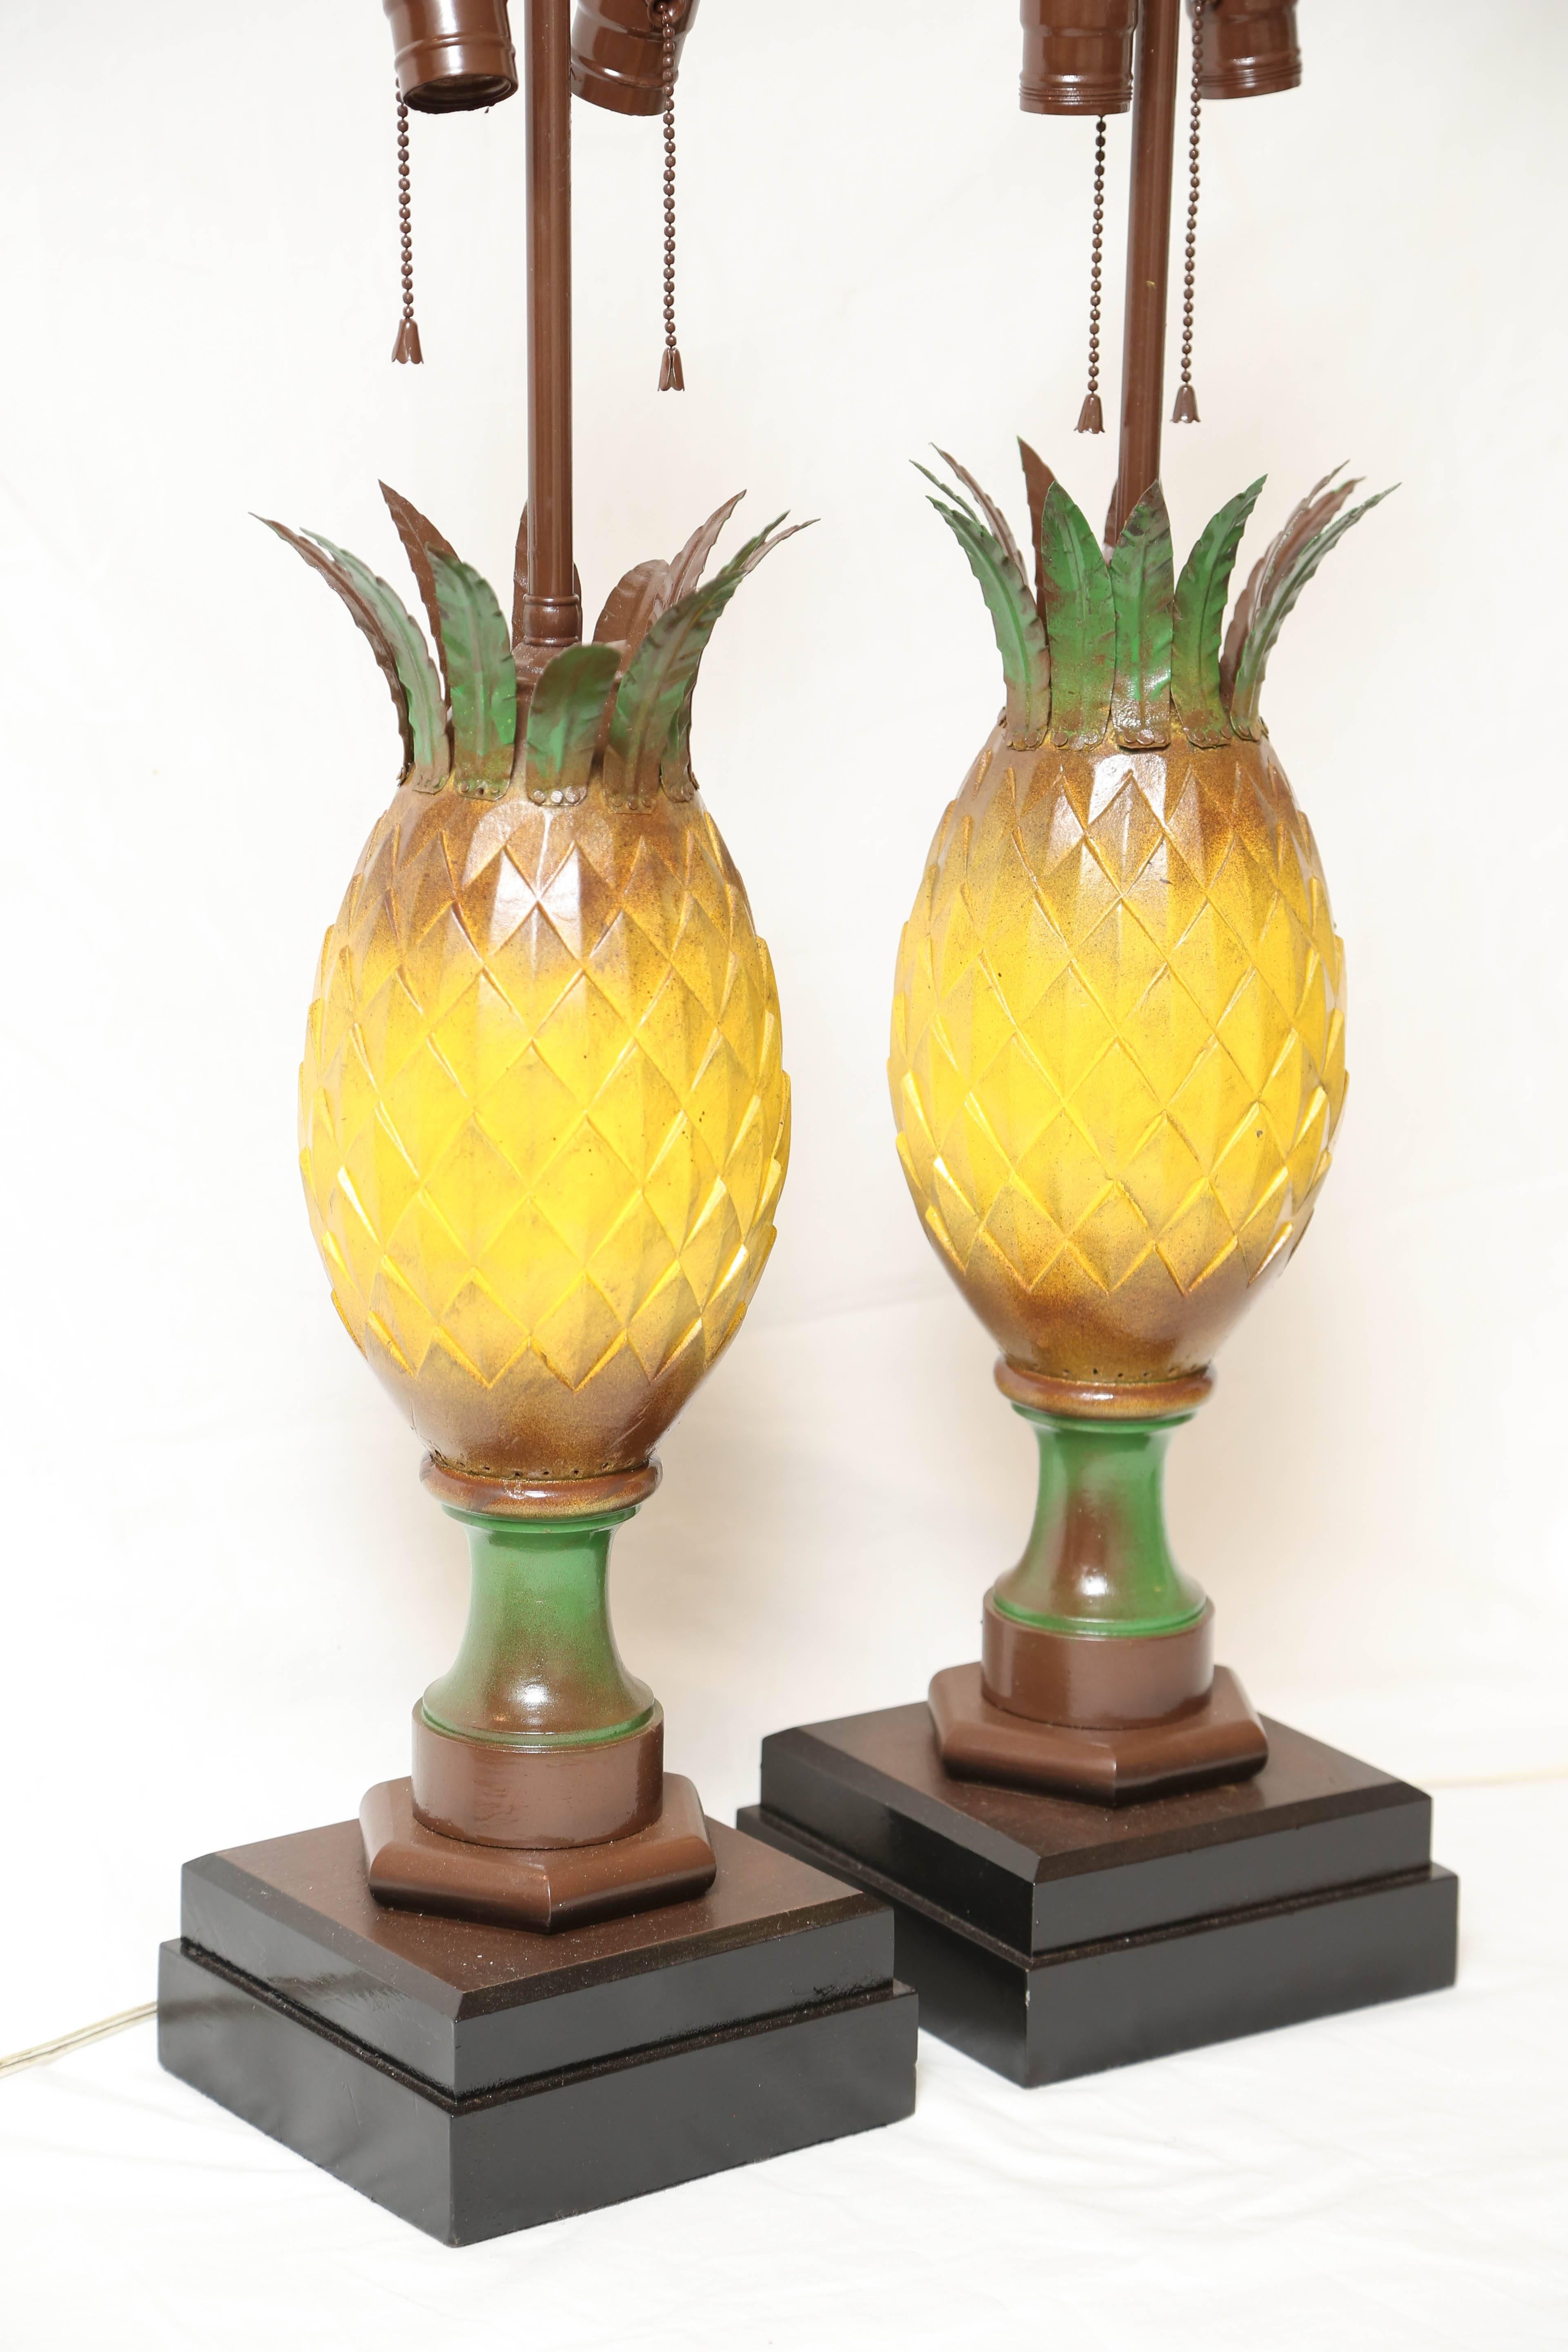 A whimsical pair of handmade vintage tole decorated carved wood pineapples vibrantly painted and dramatic in form.
An old Palm Beach find.